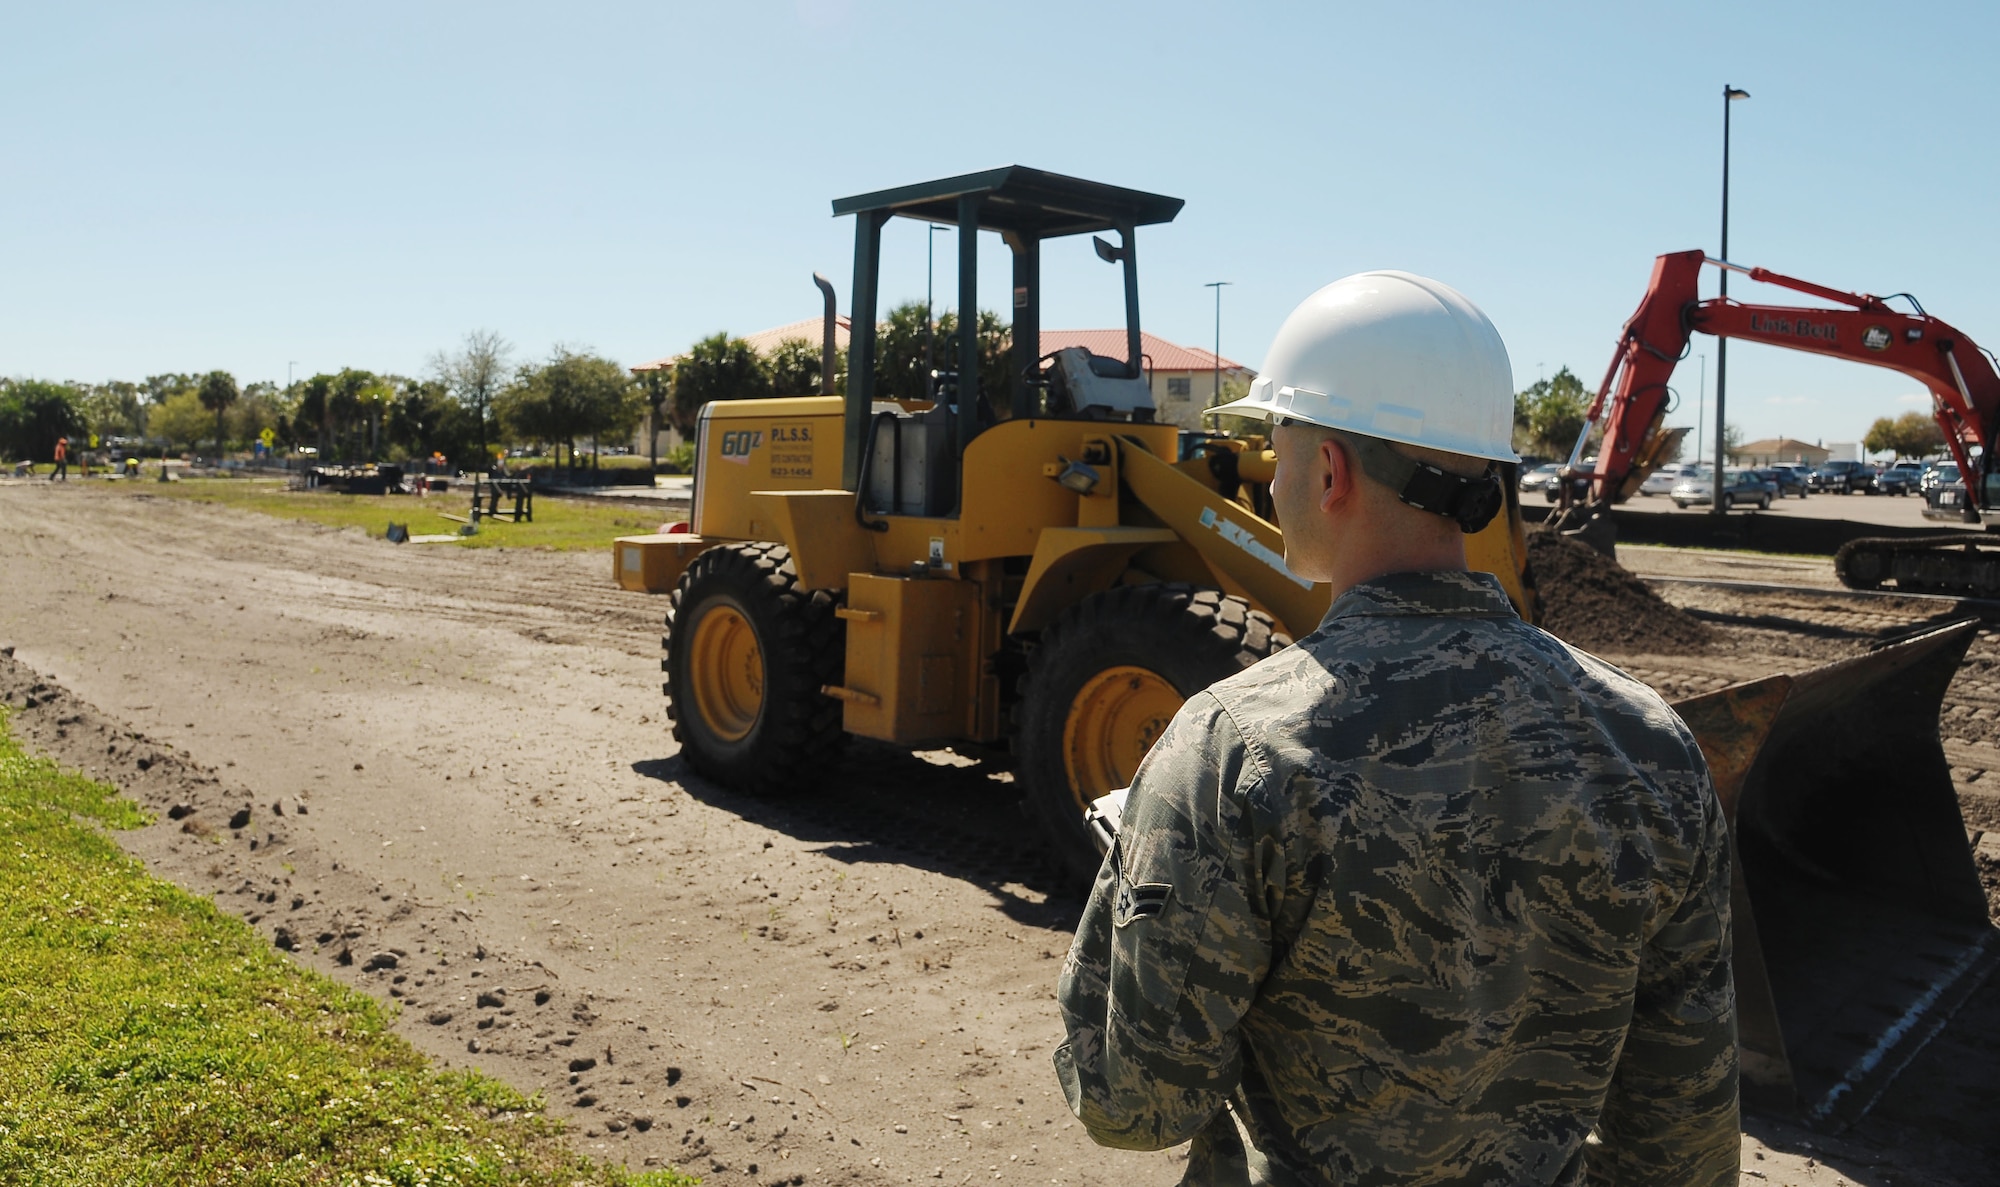 Airman 1st Class Jean Suazo, a contract specialist assigned to the 6th Contracting Squadron performs a construction site survey at MacDill Air Force Base, Fla., Feb. 24, 2017. Specialists like Suazo periodically conduct surveys of projects they’ve helped create to ensure workers are being paid what was agreed on in the contract. (U.S. Air Force photo by Airman 1st Class Adam R. Shanks)